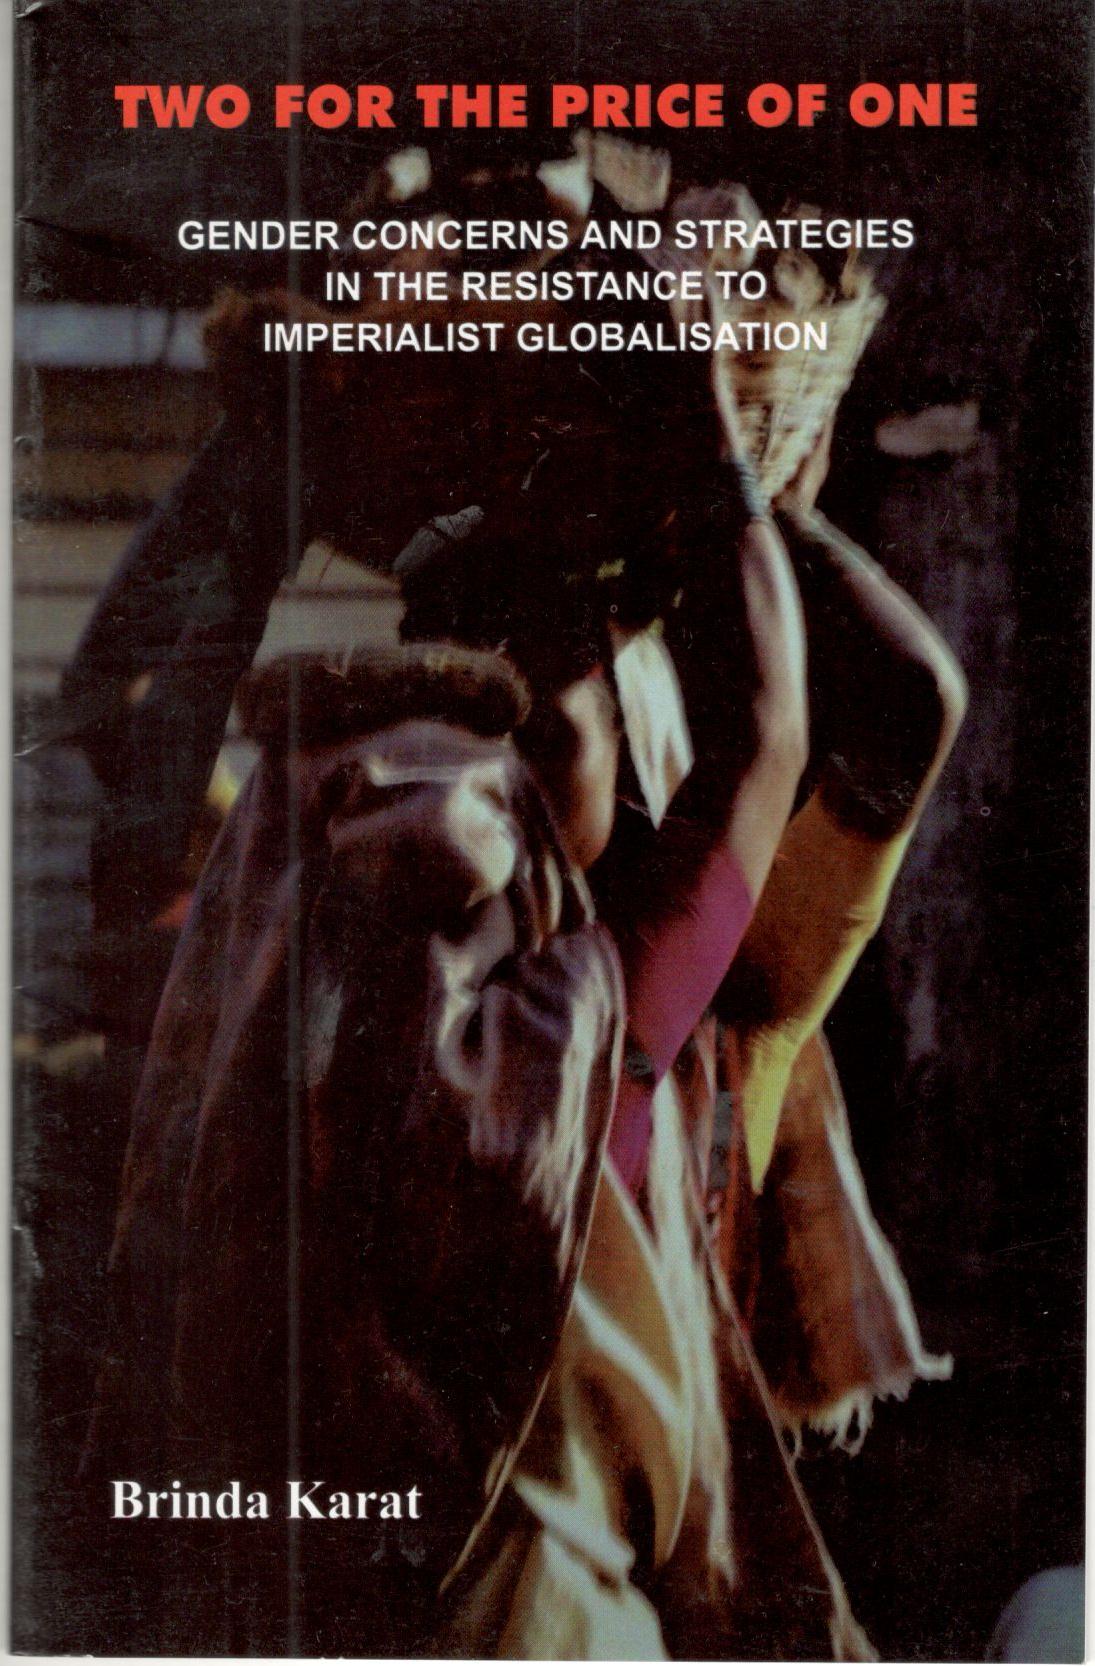 GENDER CONCERNS AND STRATEGIES IN THE RESISTANCE TO IMPERIALIST GLOBALISATION